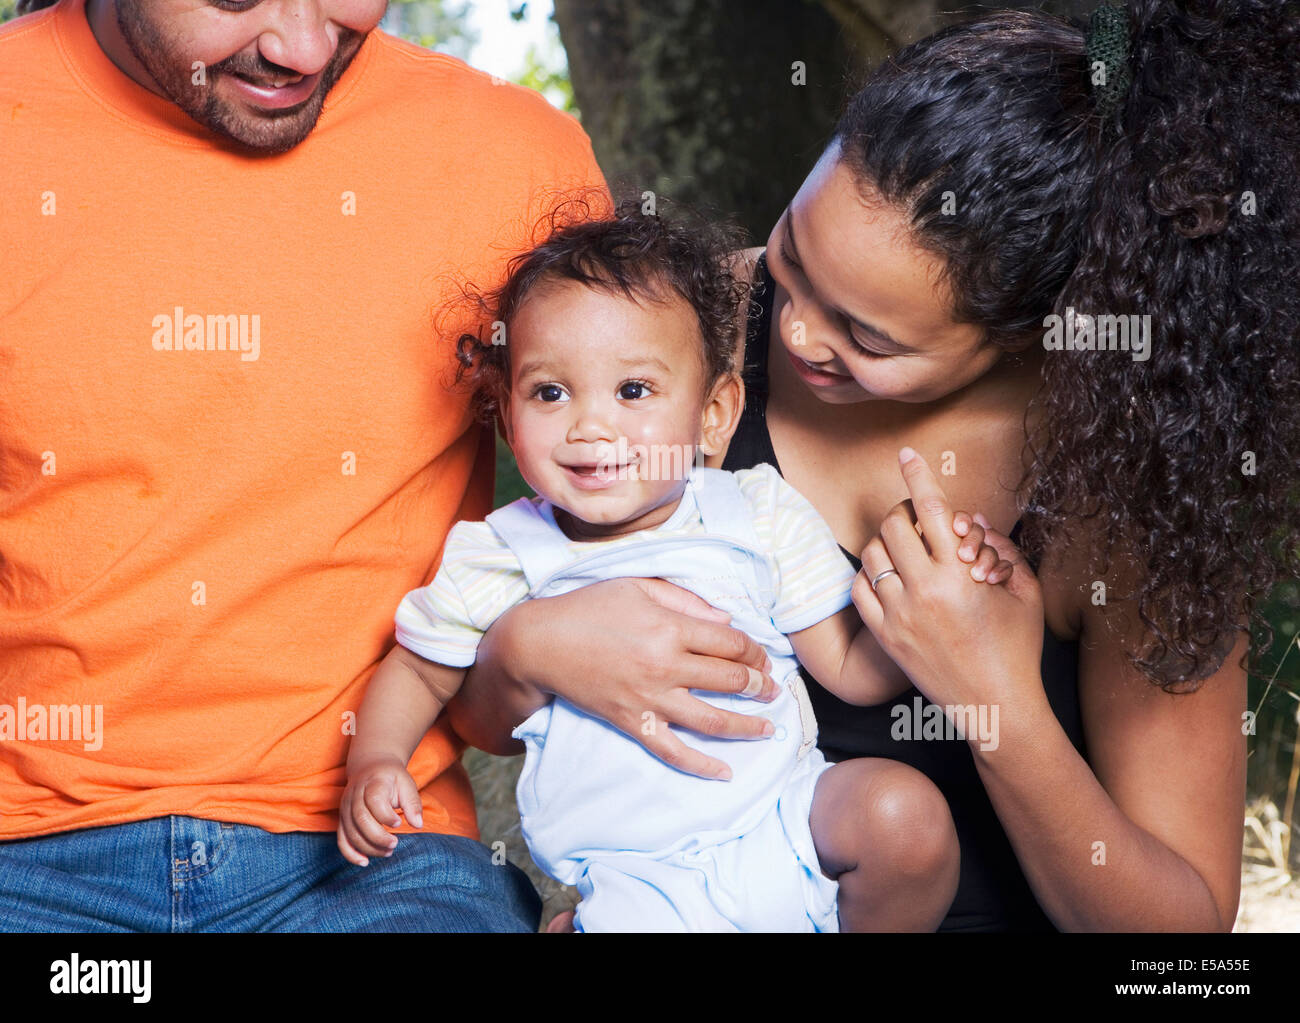 Couple holding baby outdoors Stock Photo